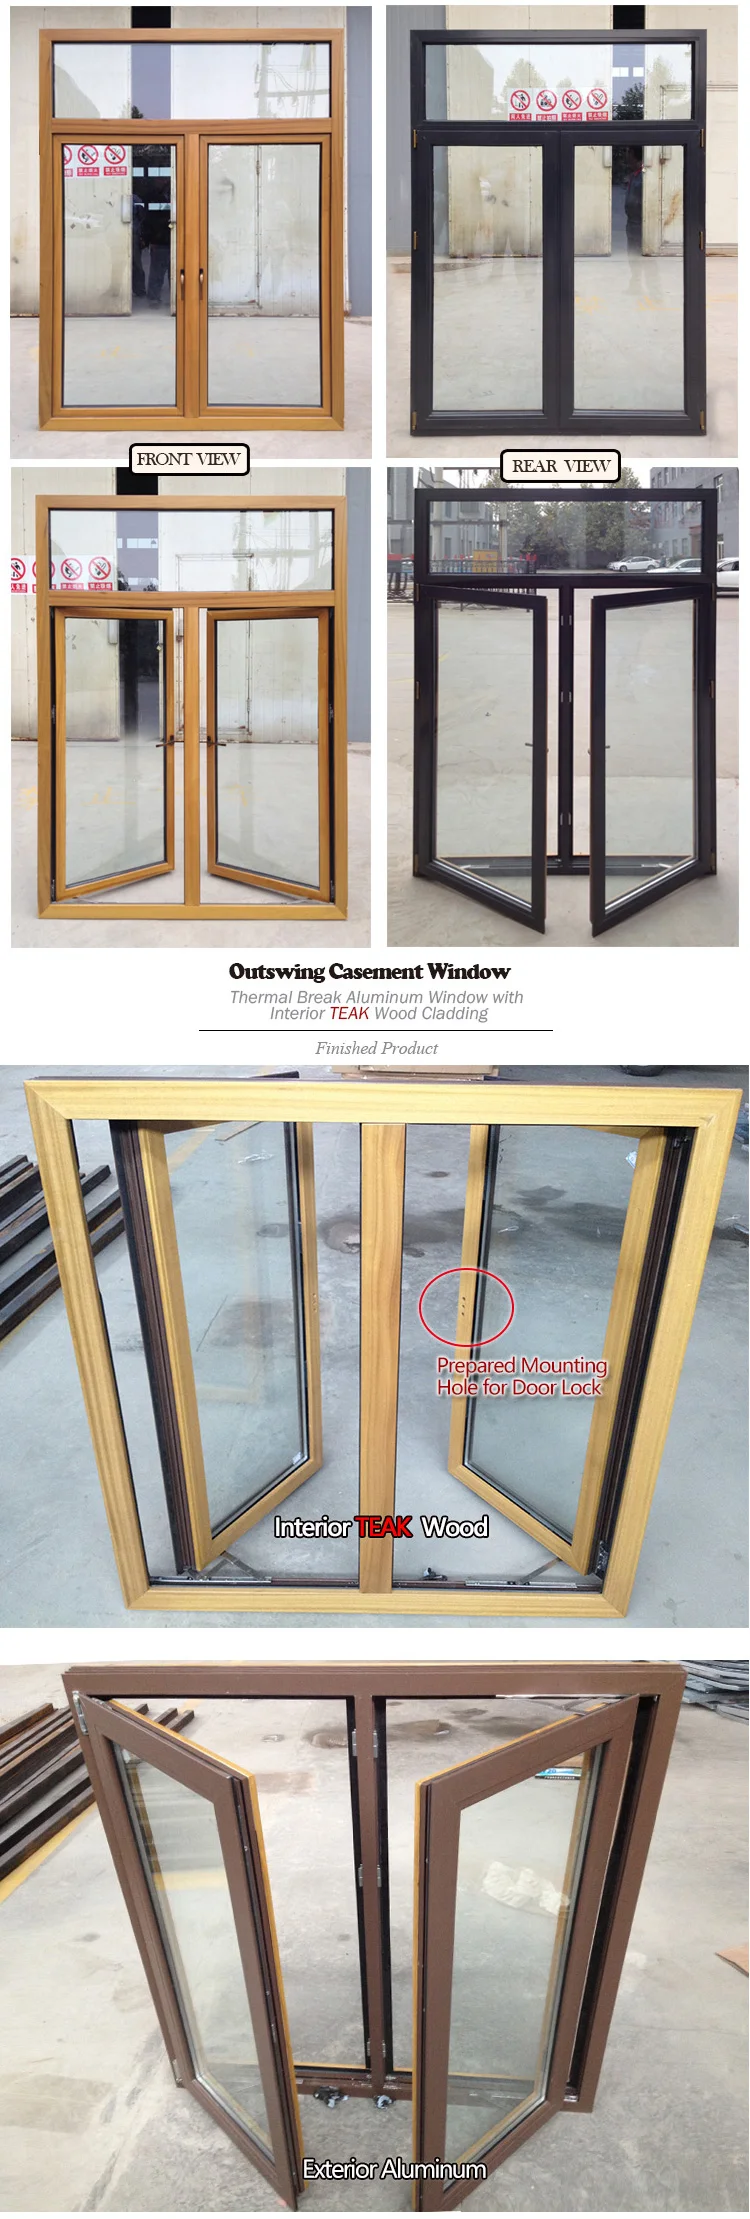 French style casement windows push out wood windows